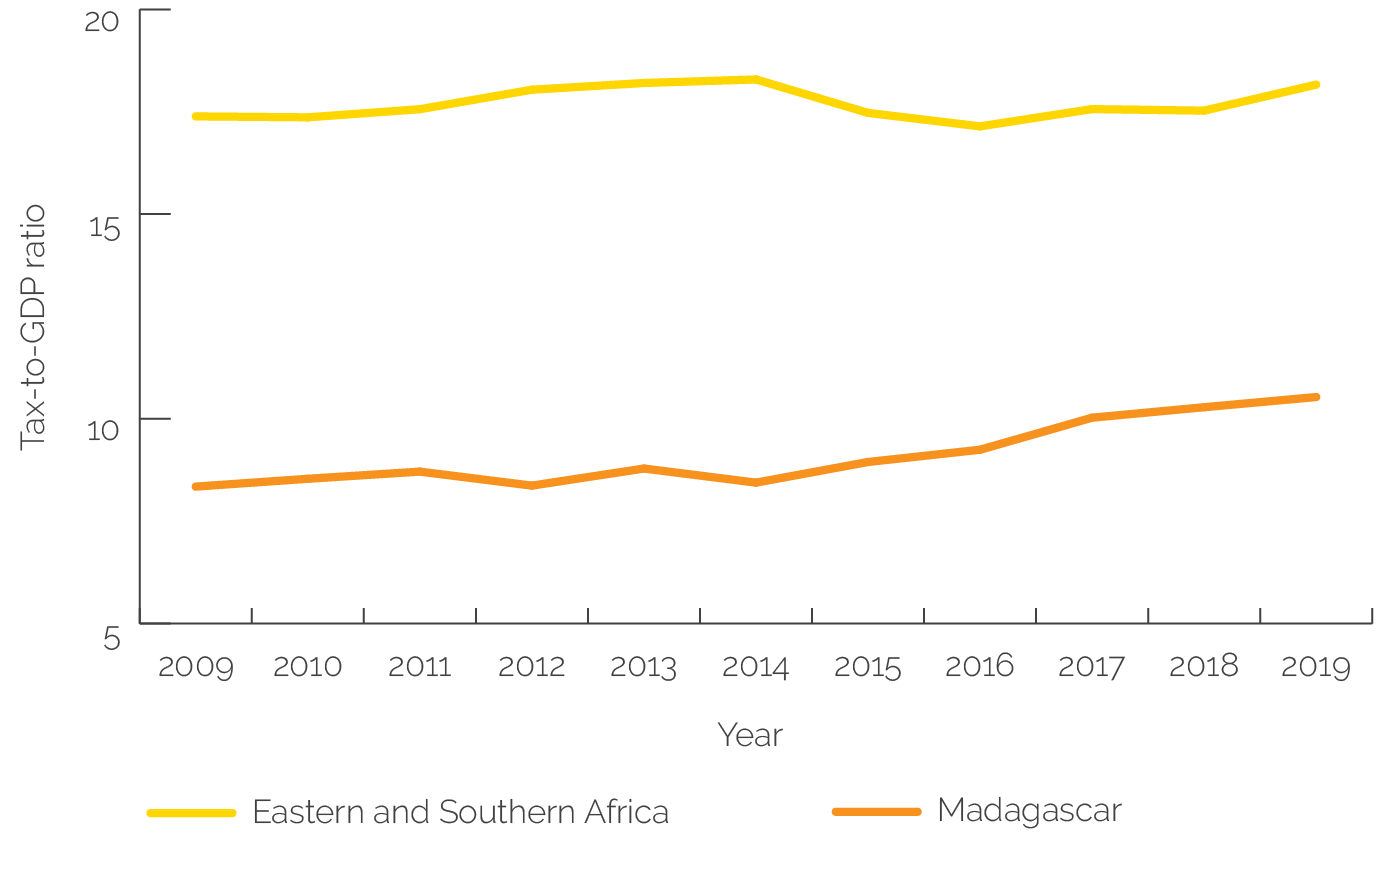 A line graph comparing Madagascar’s relatively low tax-to-GDP ratio over time with that of Eastern and Southern Africa.